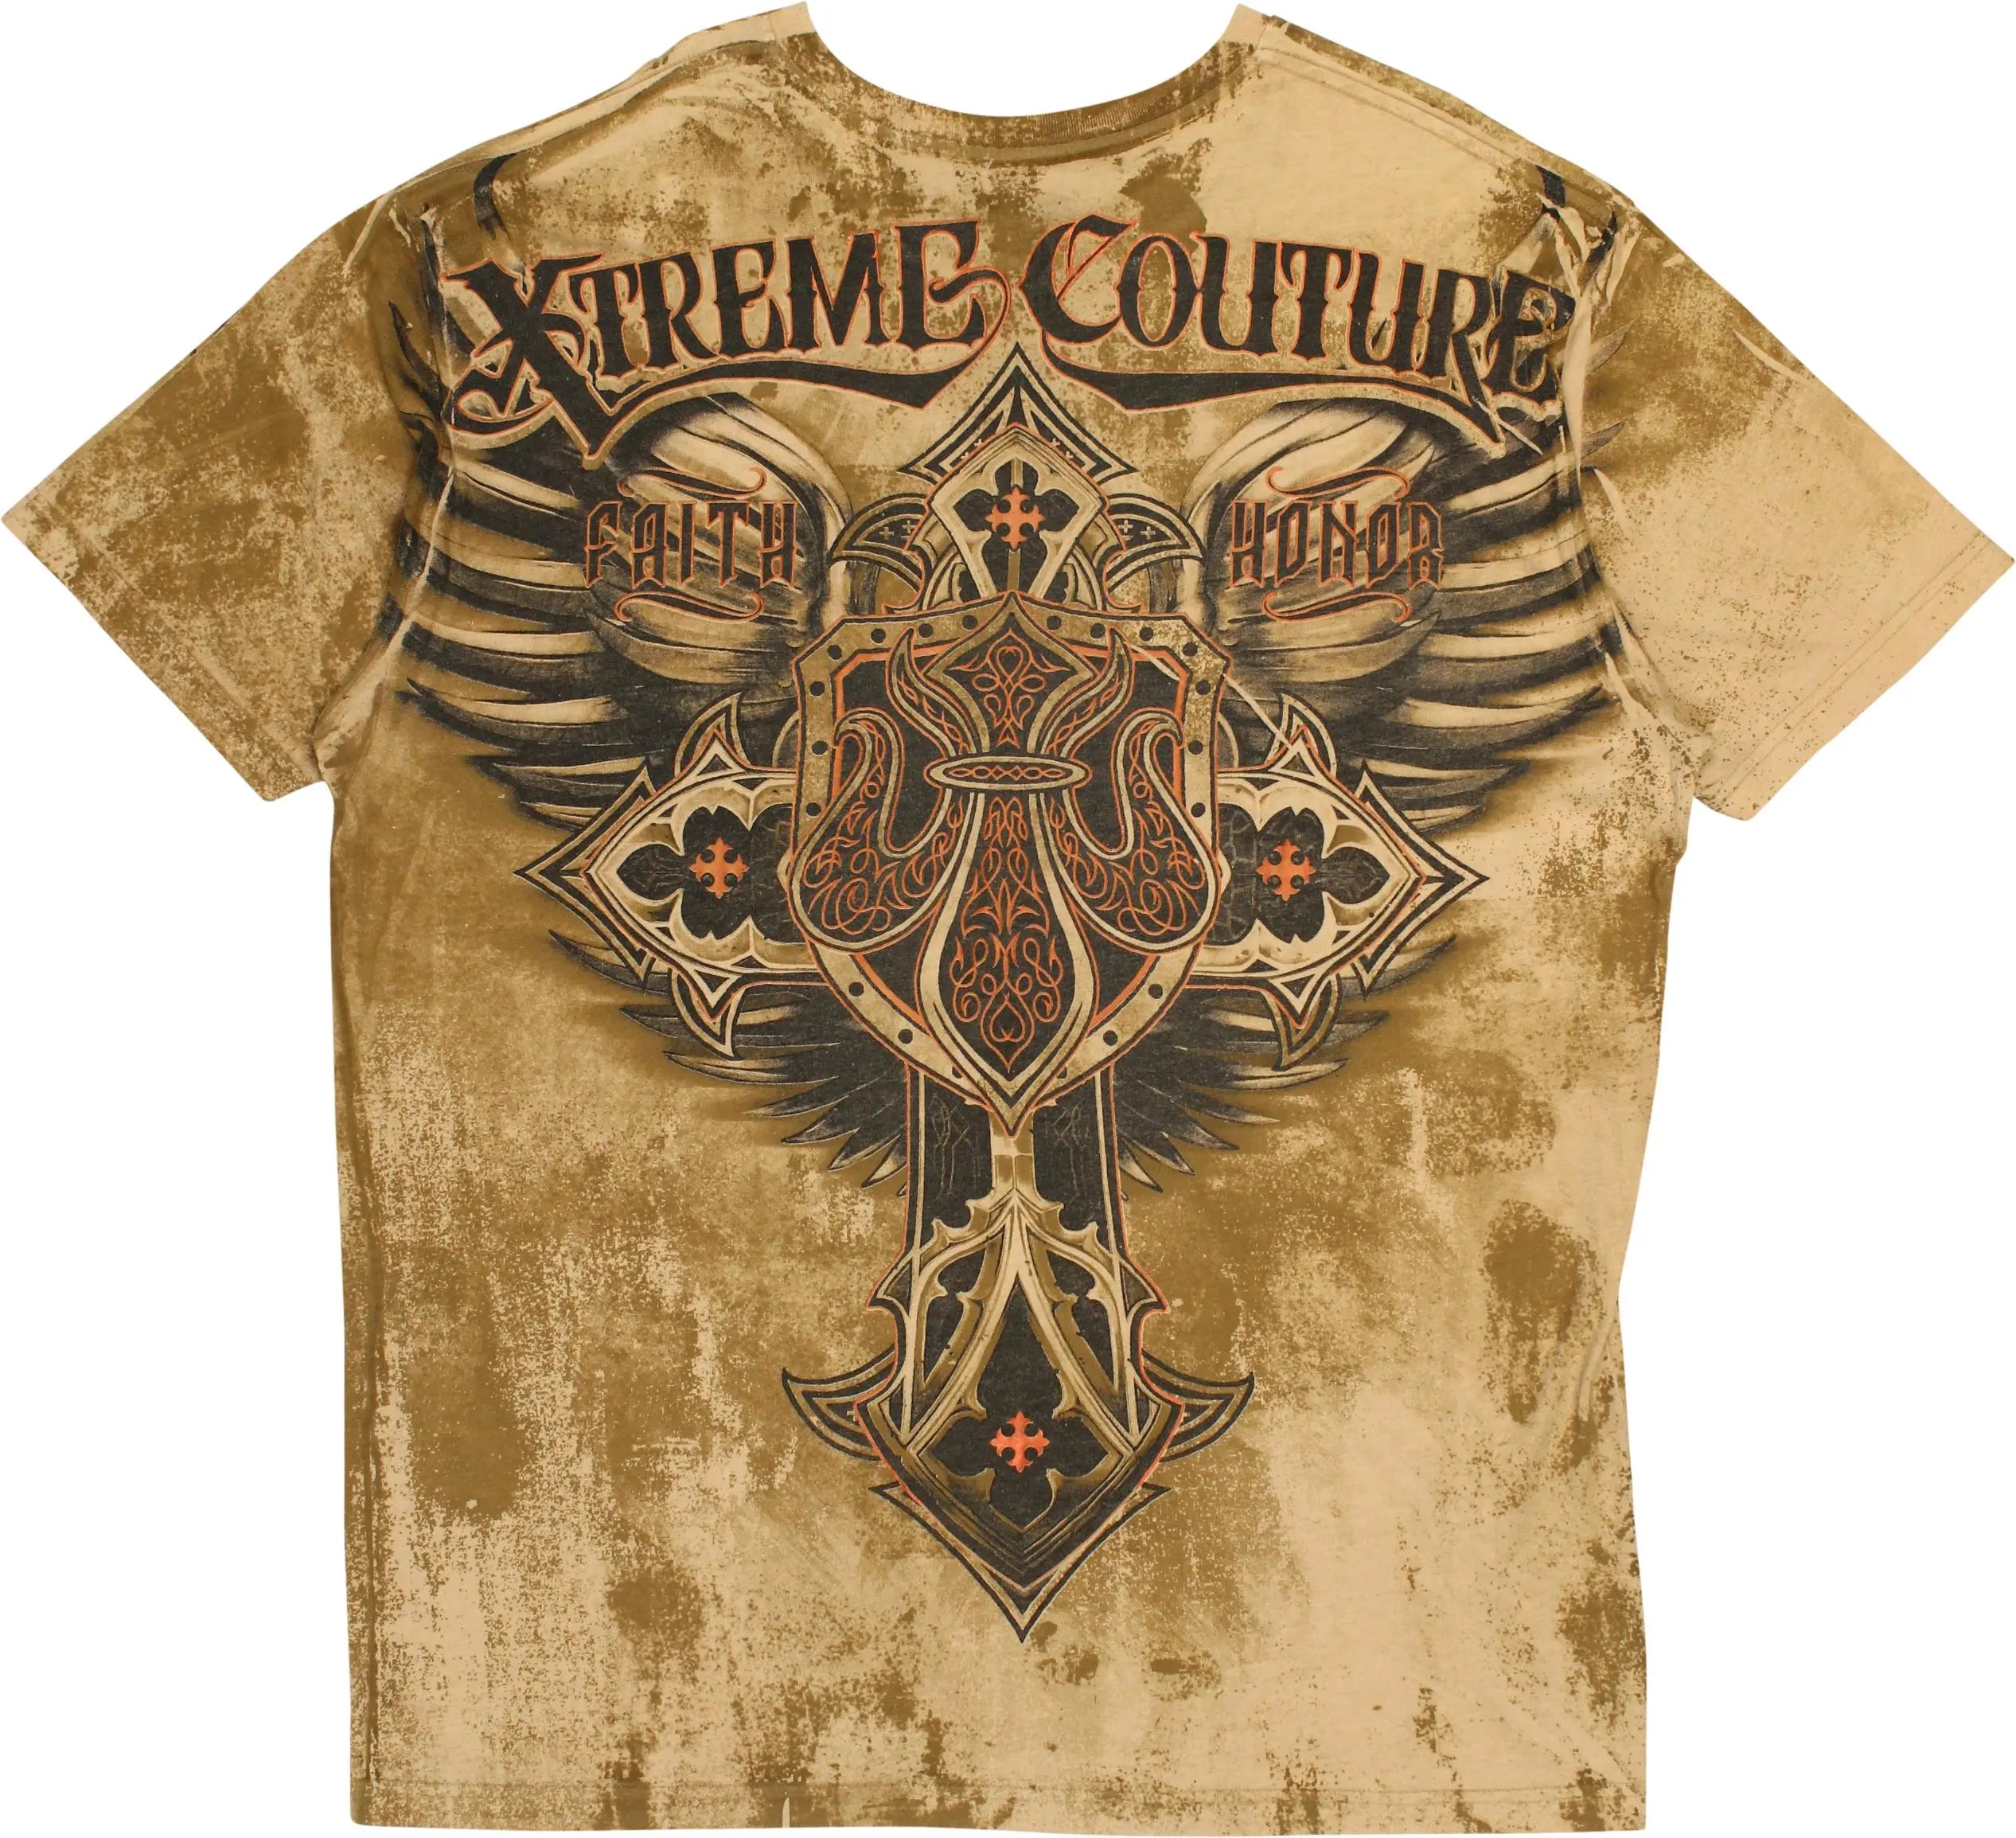 Xtreme Couture - T-shirt- ThriftTale.com - Vintage and second handclothing